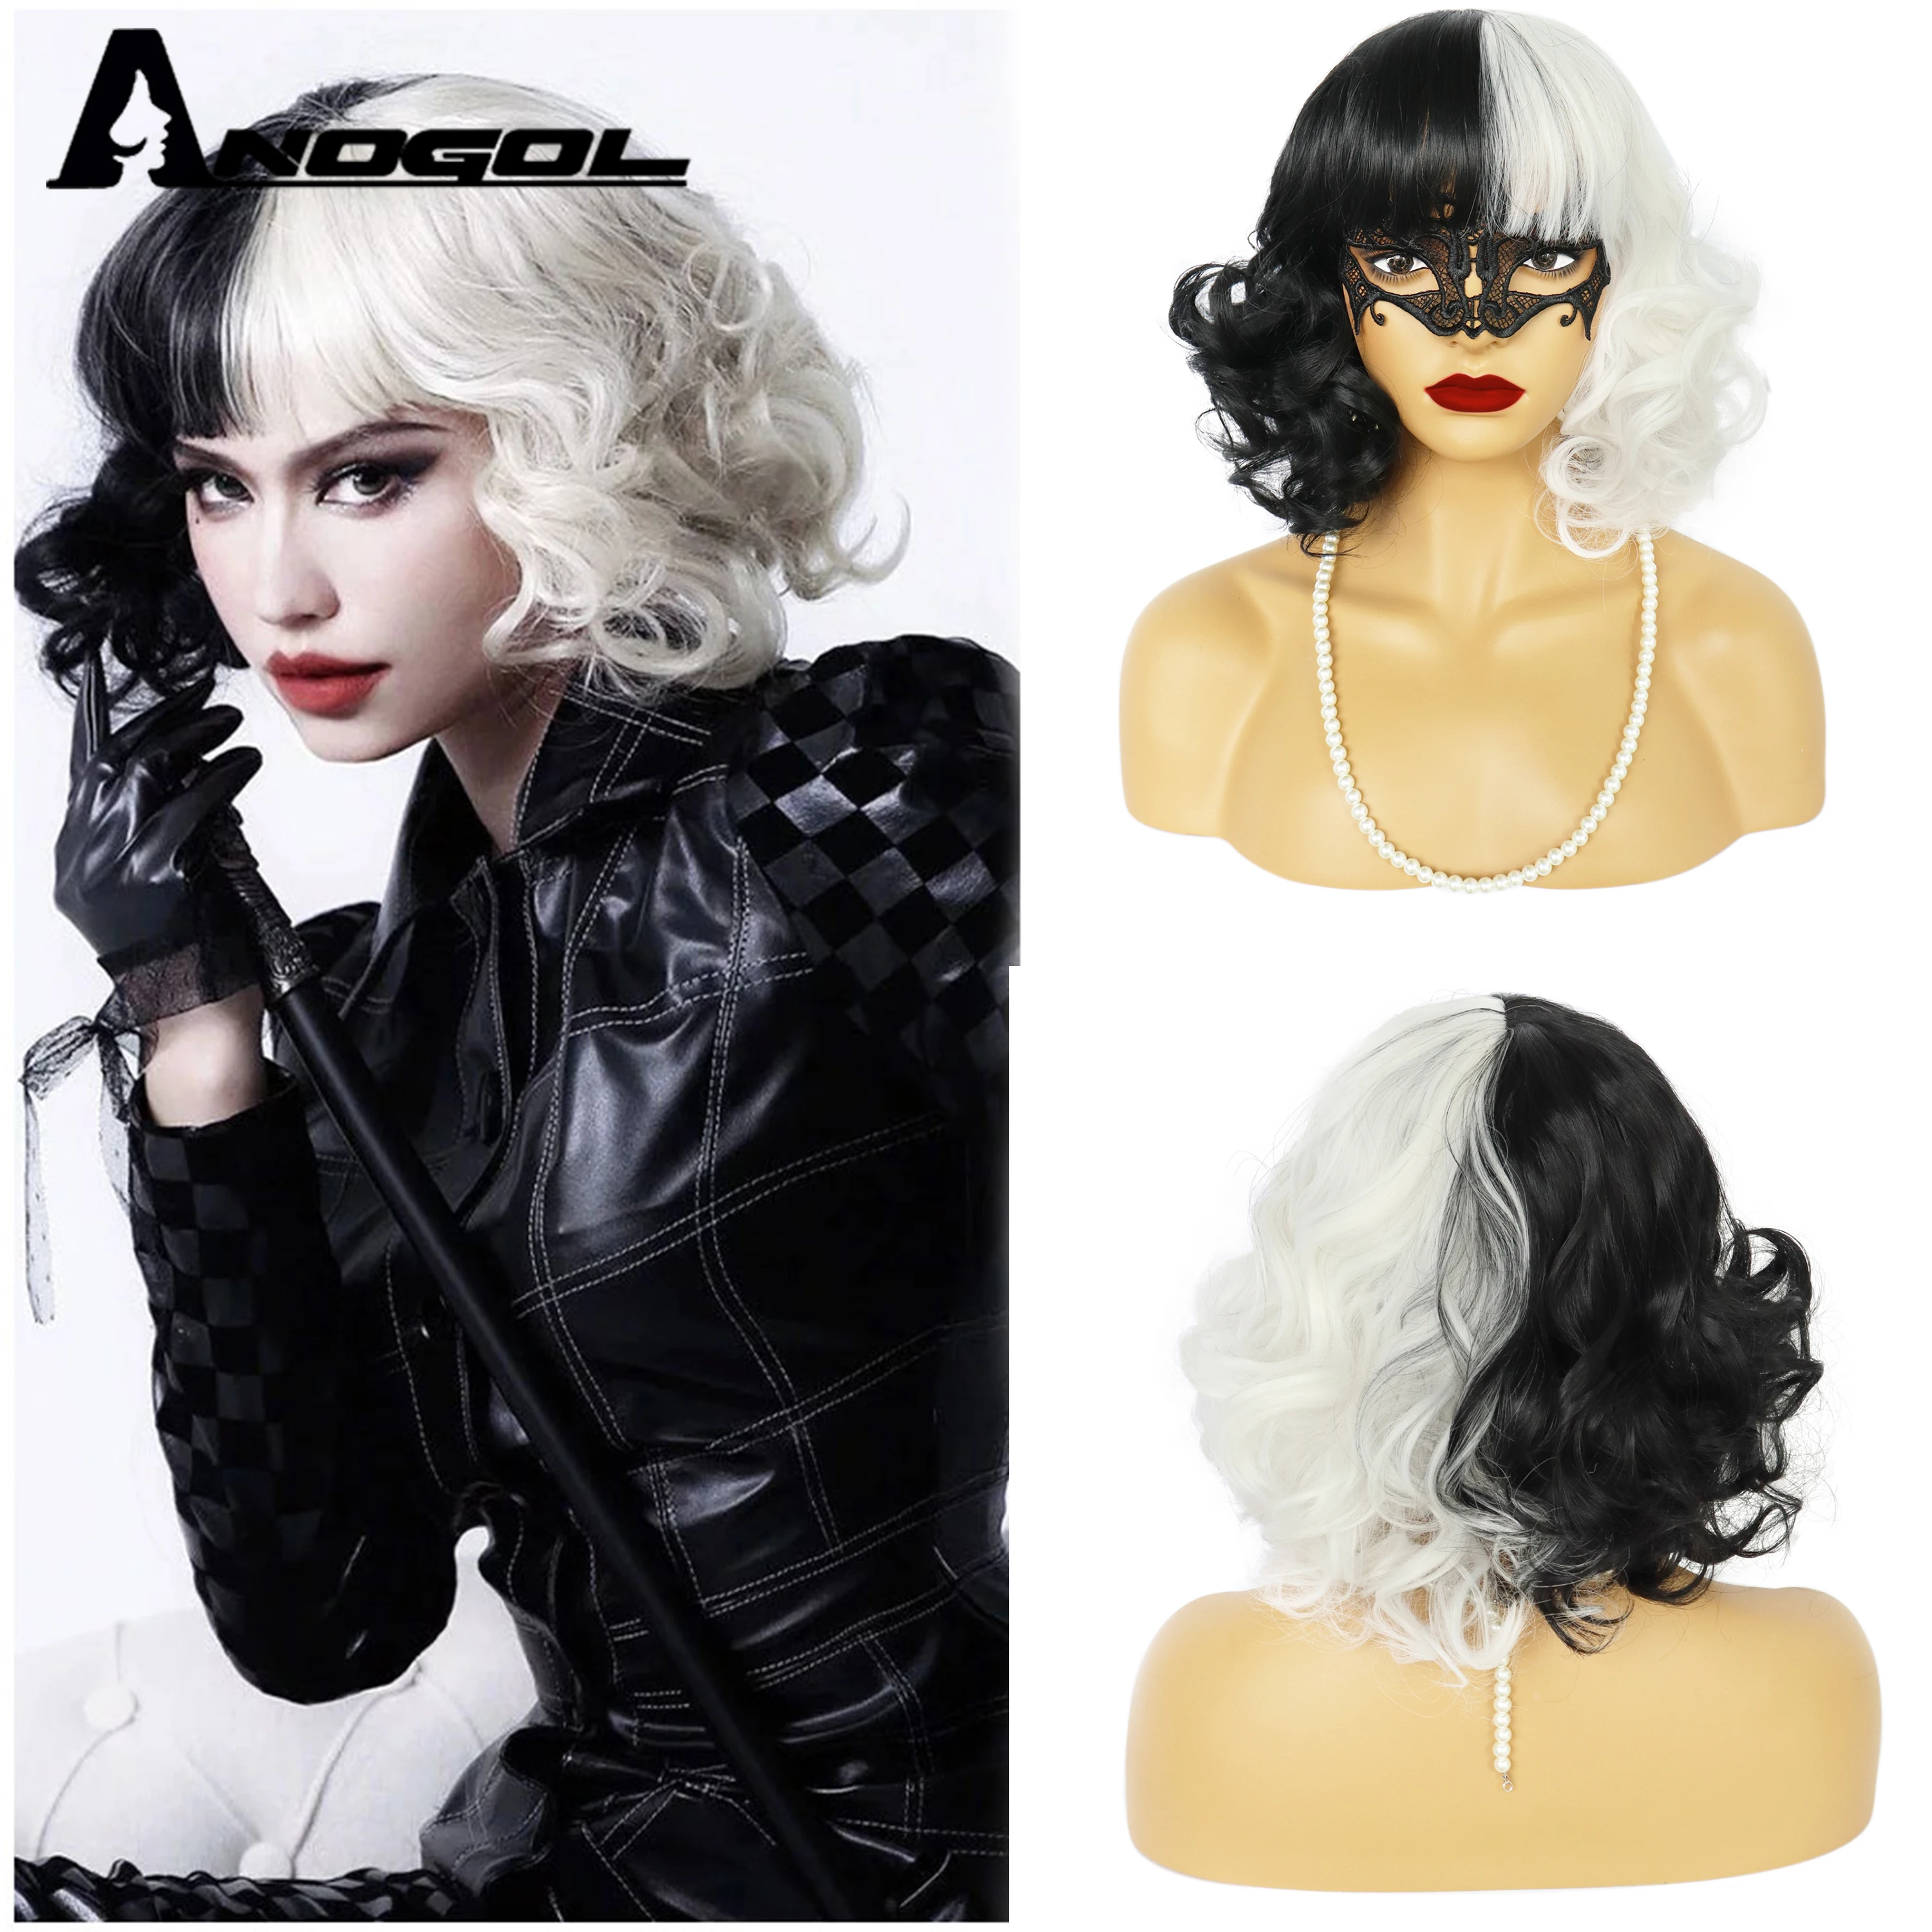 

ANOGOL CRUELLA De Vil Two Tone Natural Short Curly Wig Synthetic Short Wavy Wigs With Bangs For Women Cosplay Party Wig